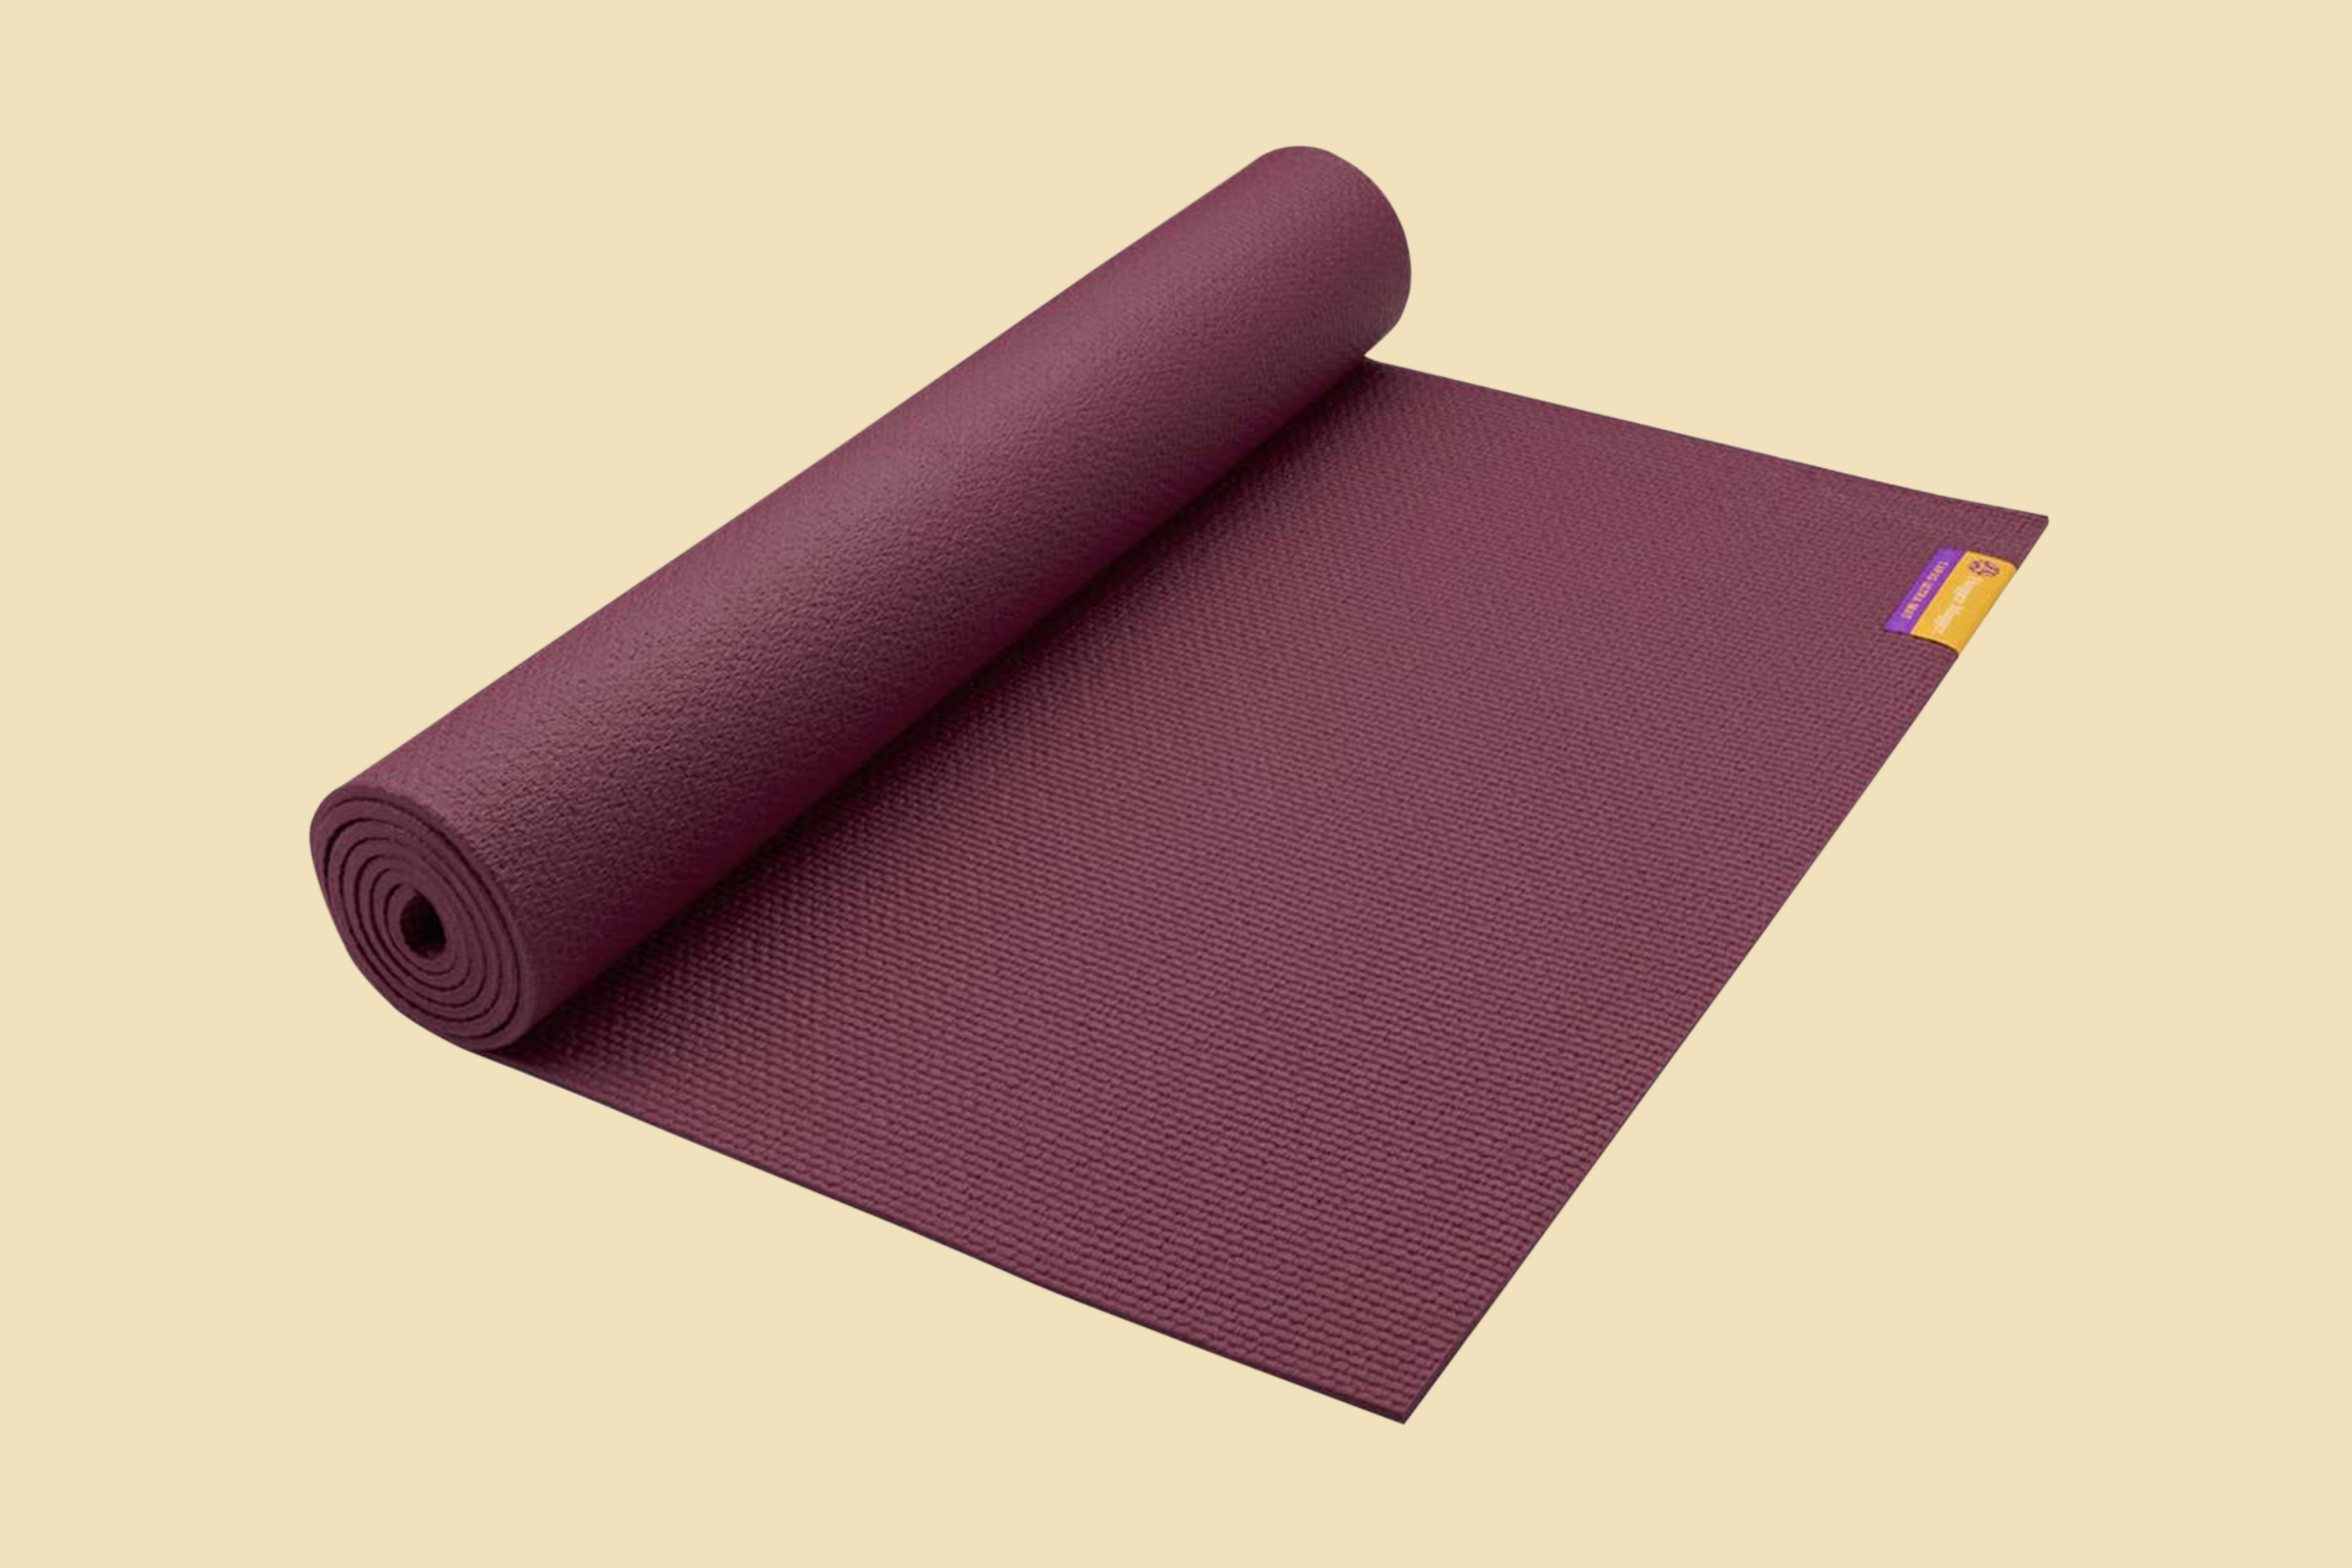 Best Yoga Mats for 2021 by Money | Money